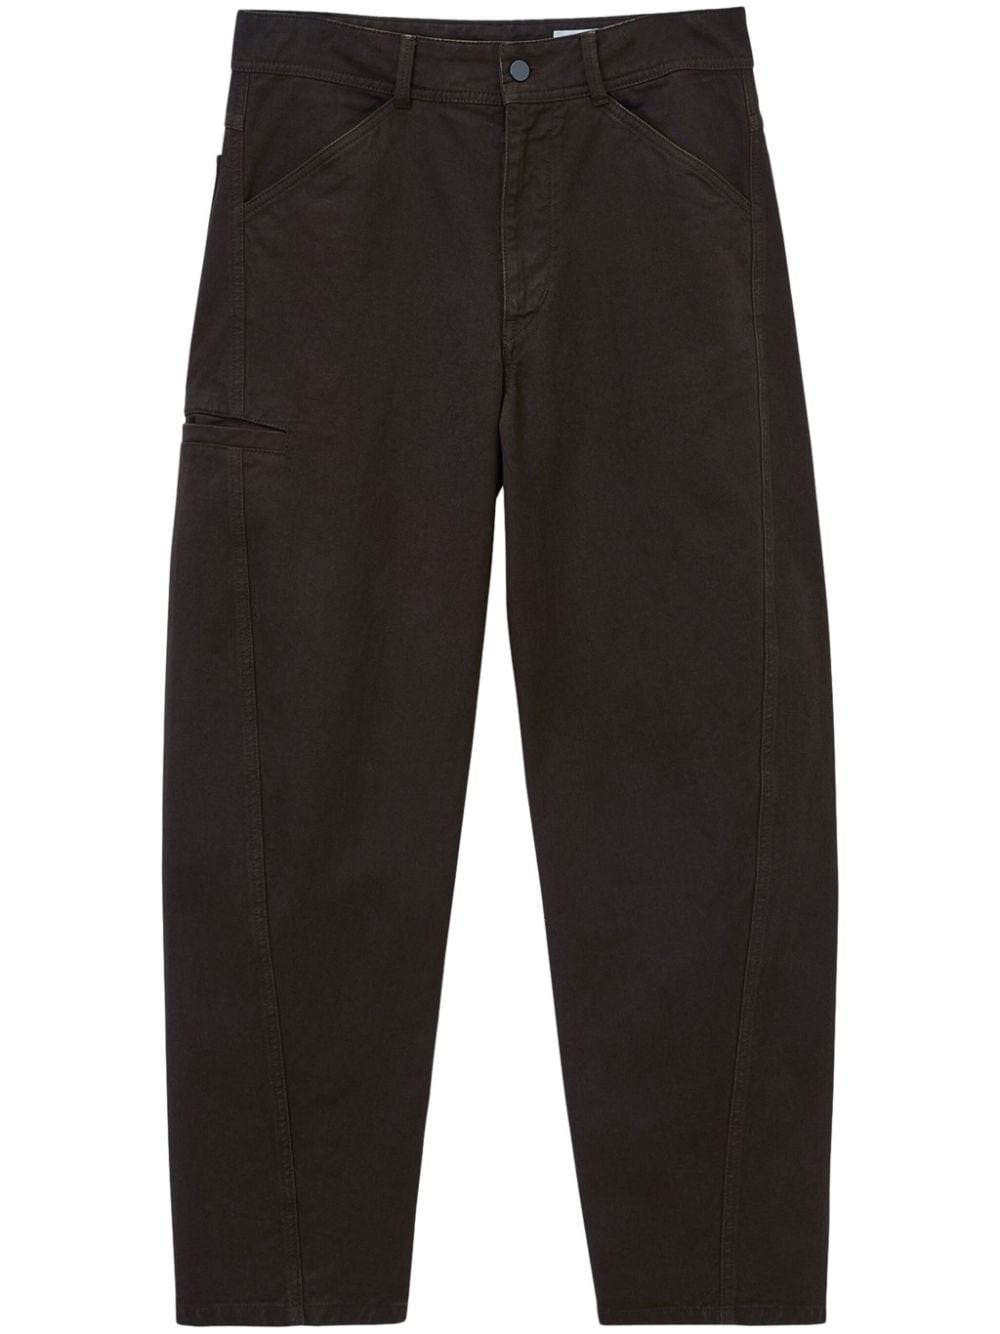 Twisted tapered trousers